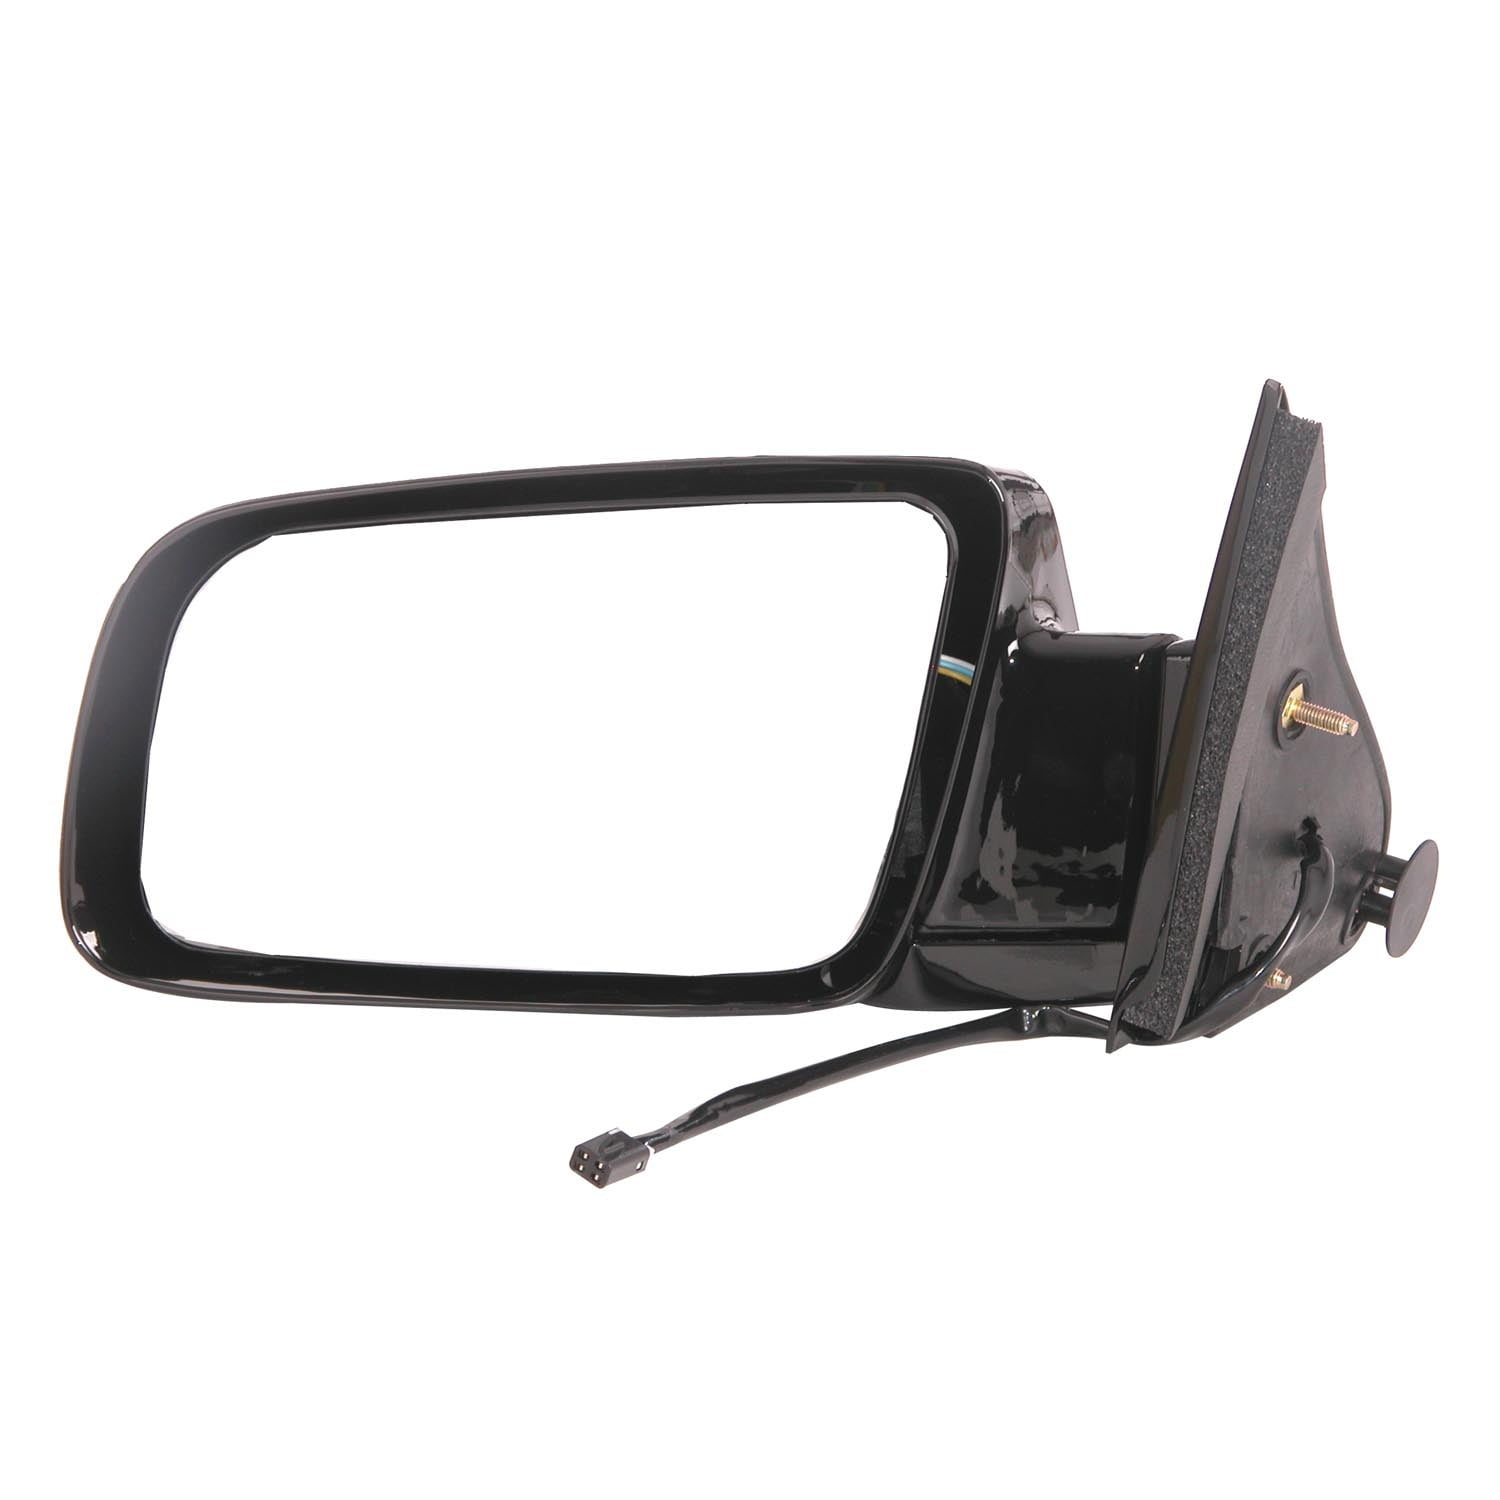 Original Style Replacement Mirror